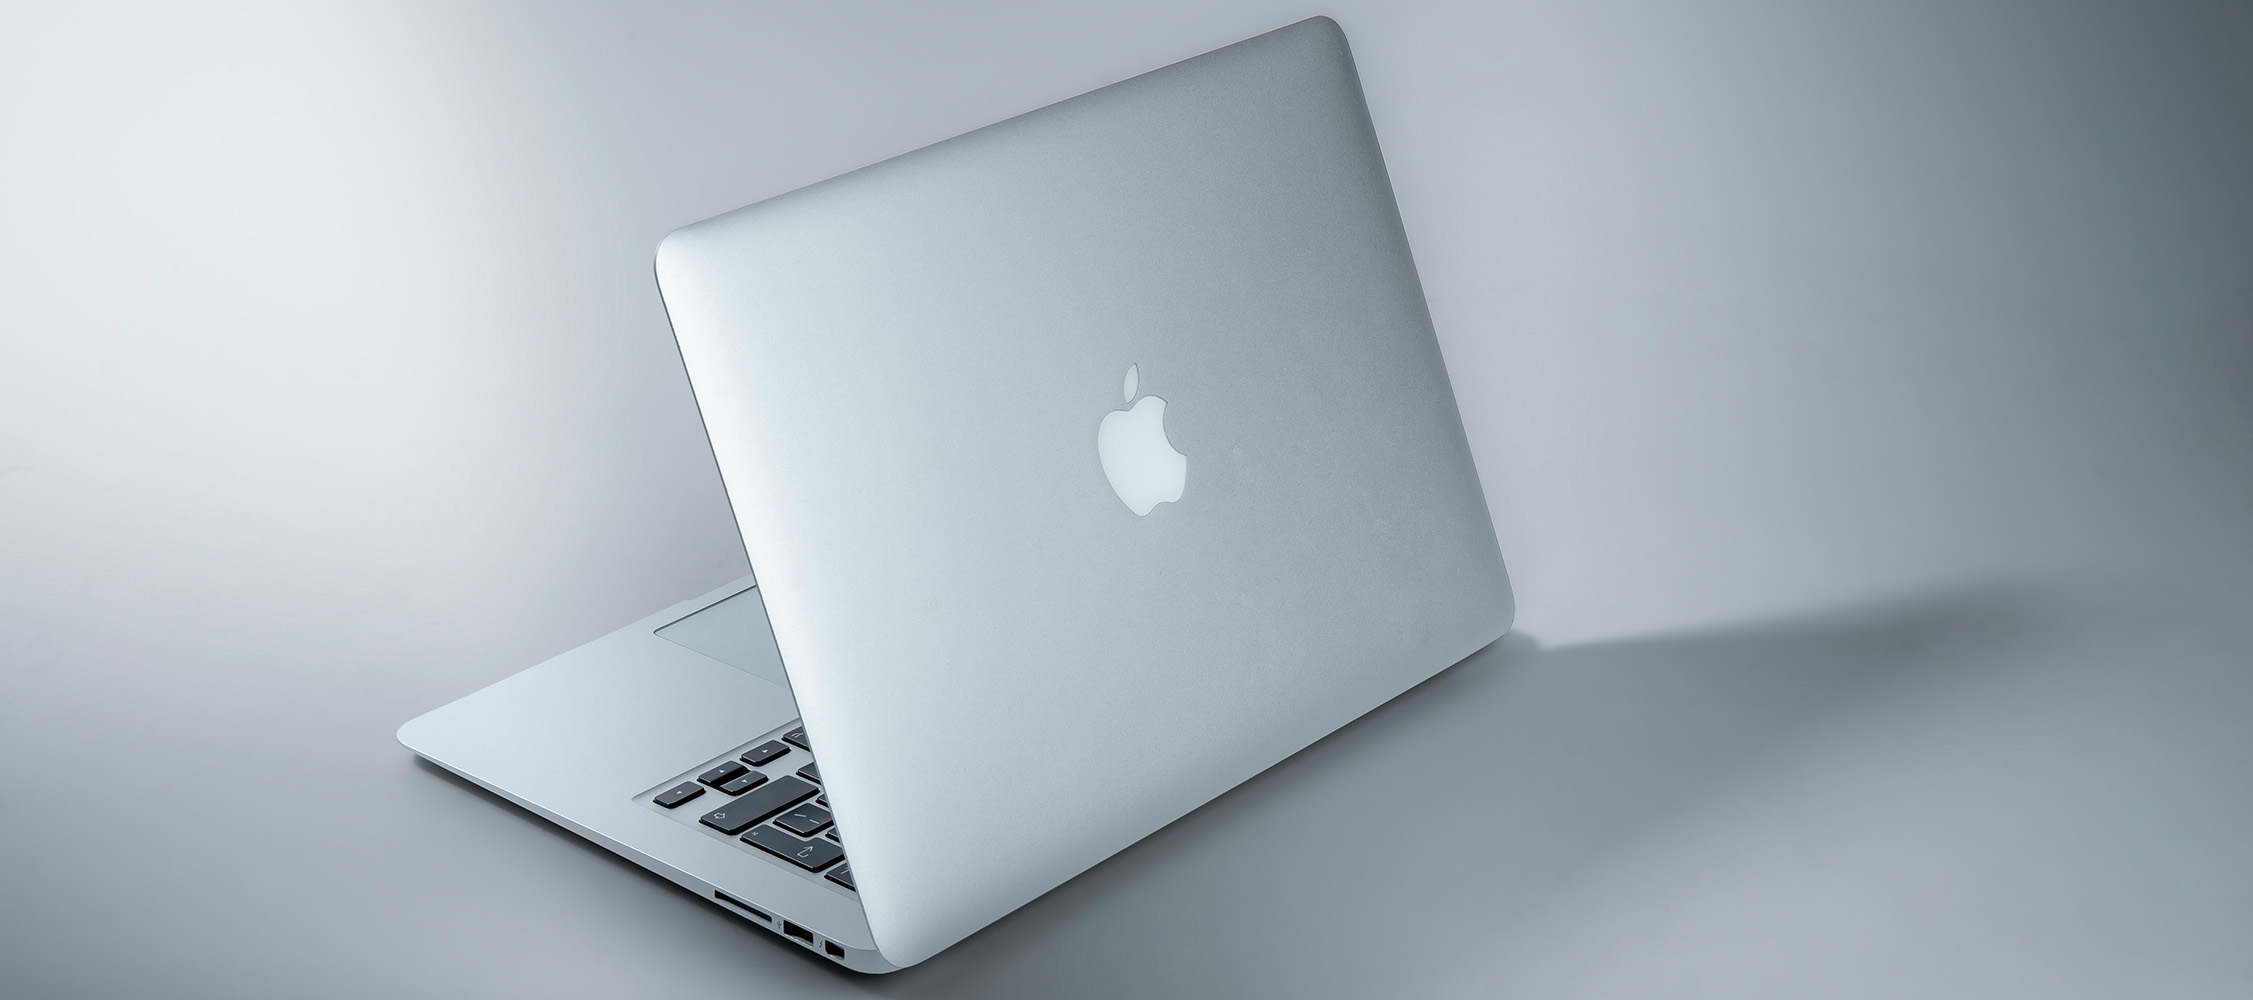 rumored low-cost macbook to rival chromebooks